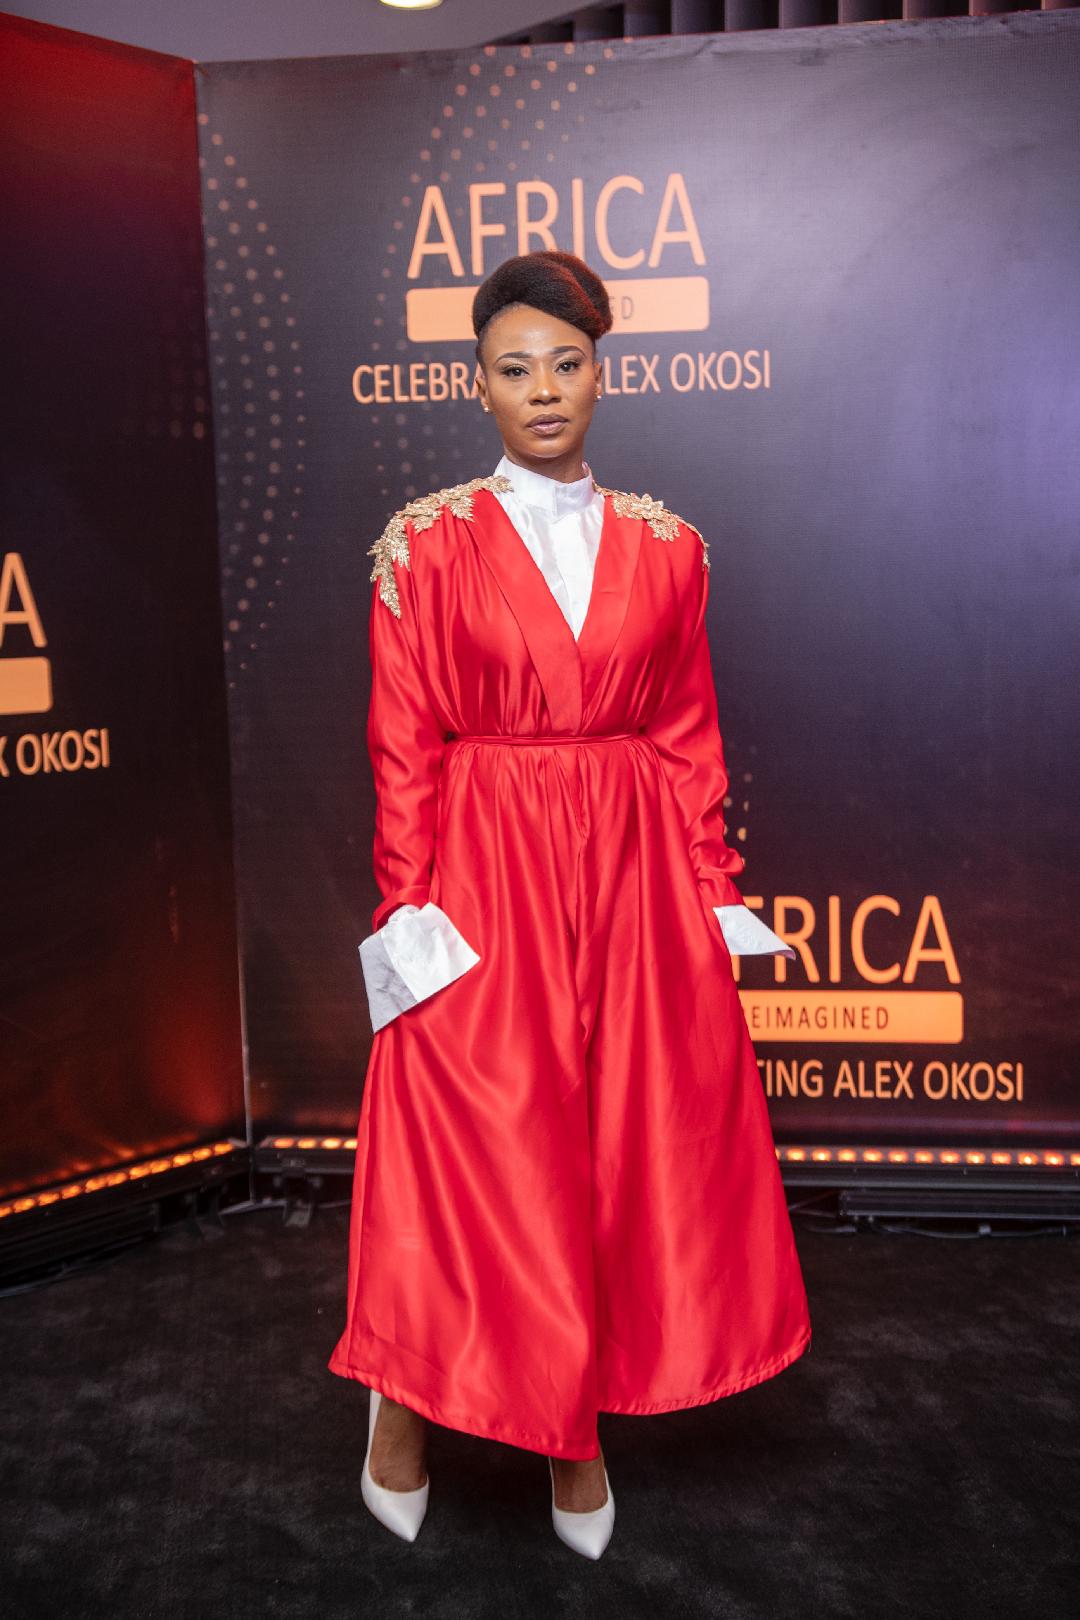 Actress Nse Ikpe-Etim 2020 Steps Out In Style For Alex Okosi’s Party